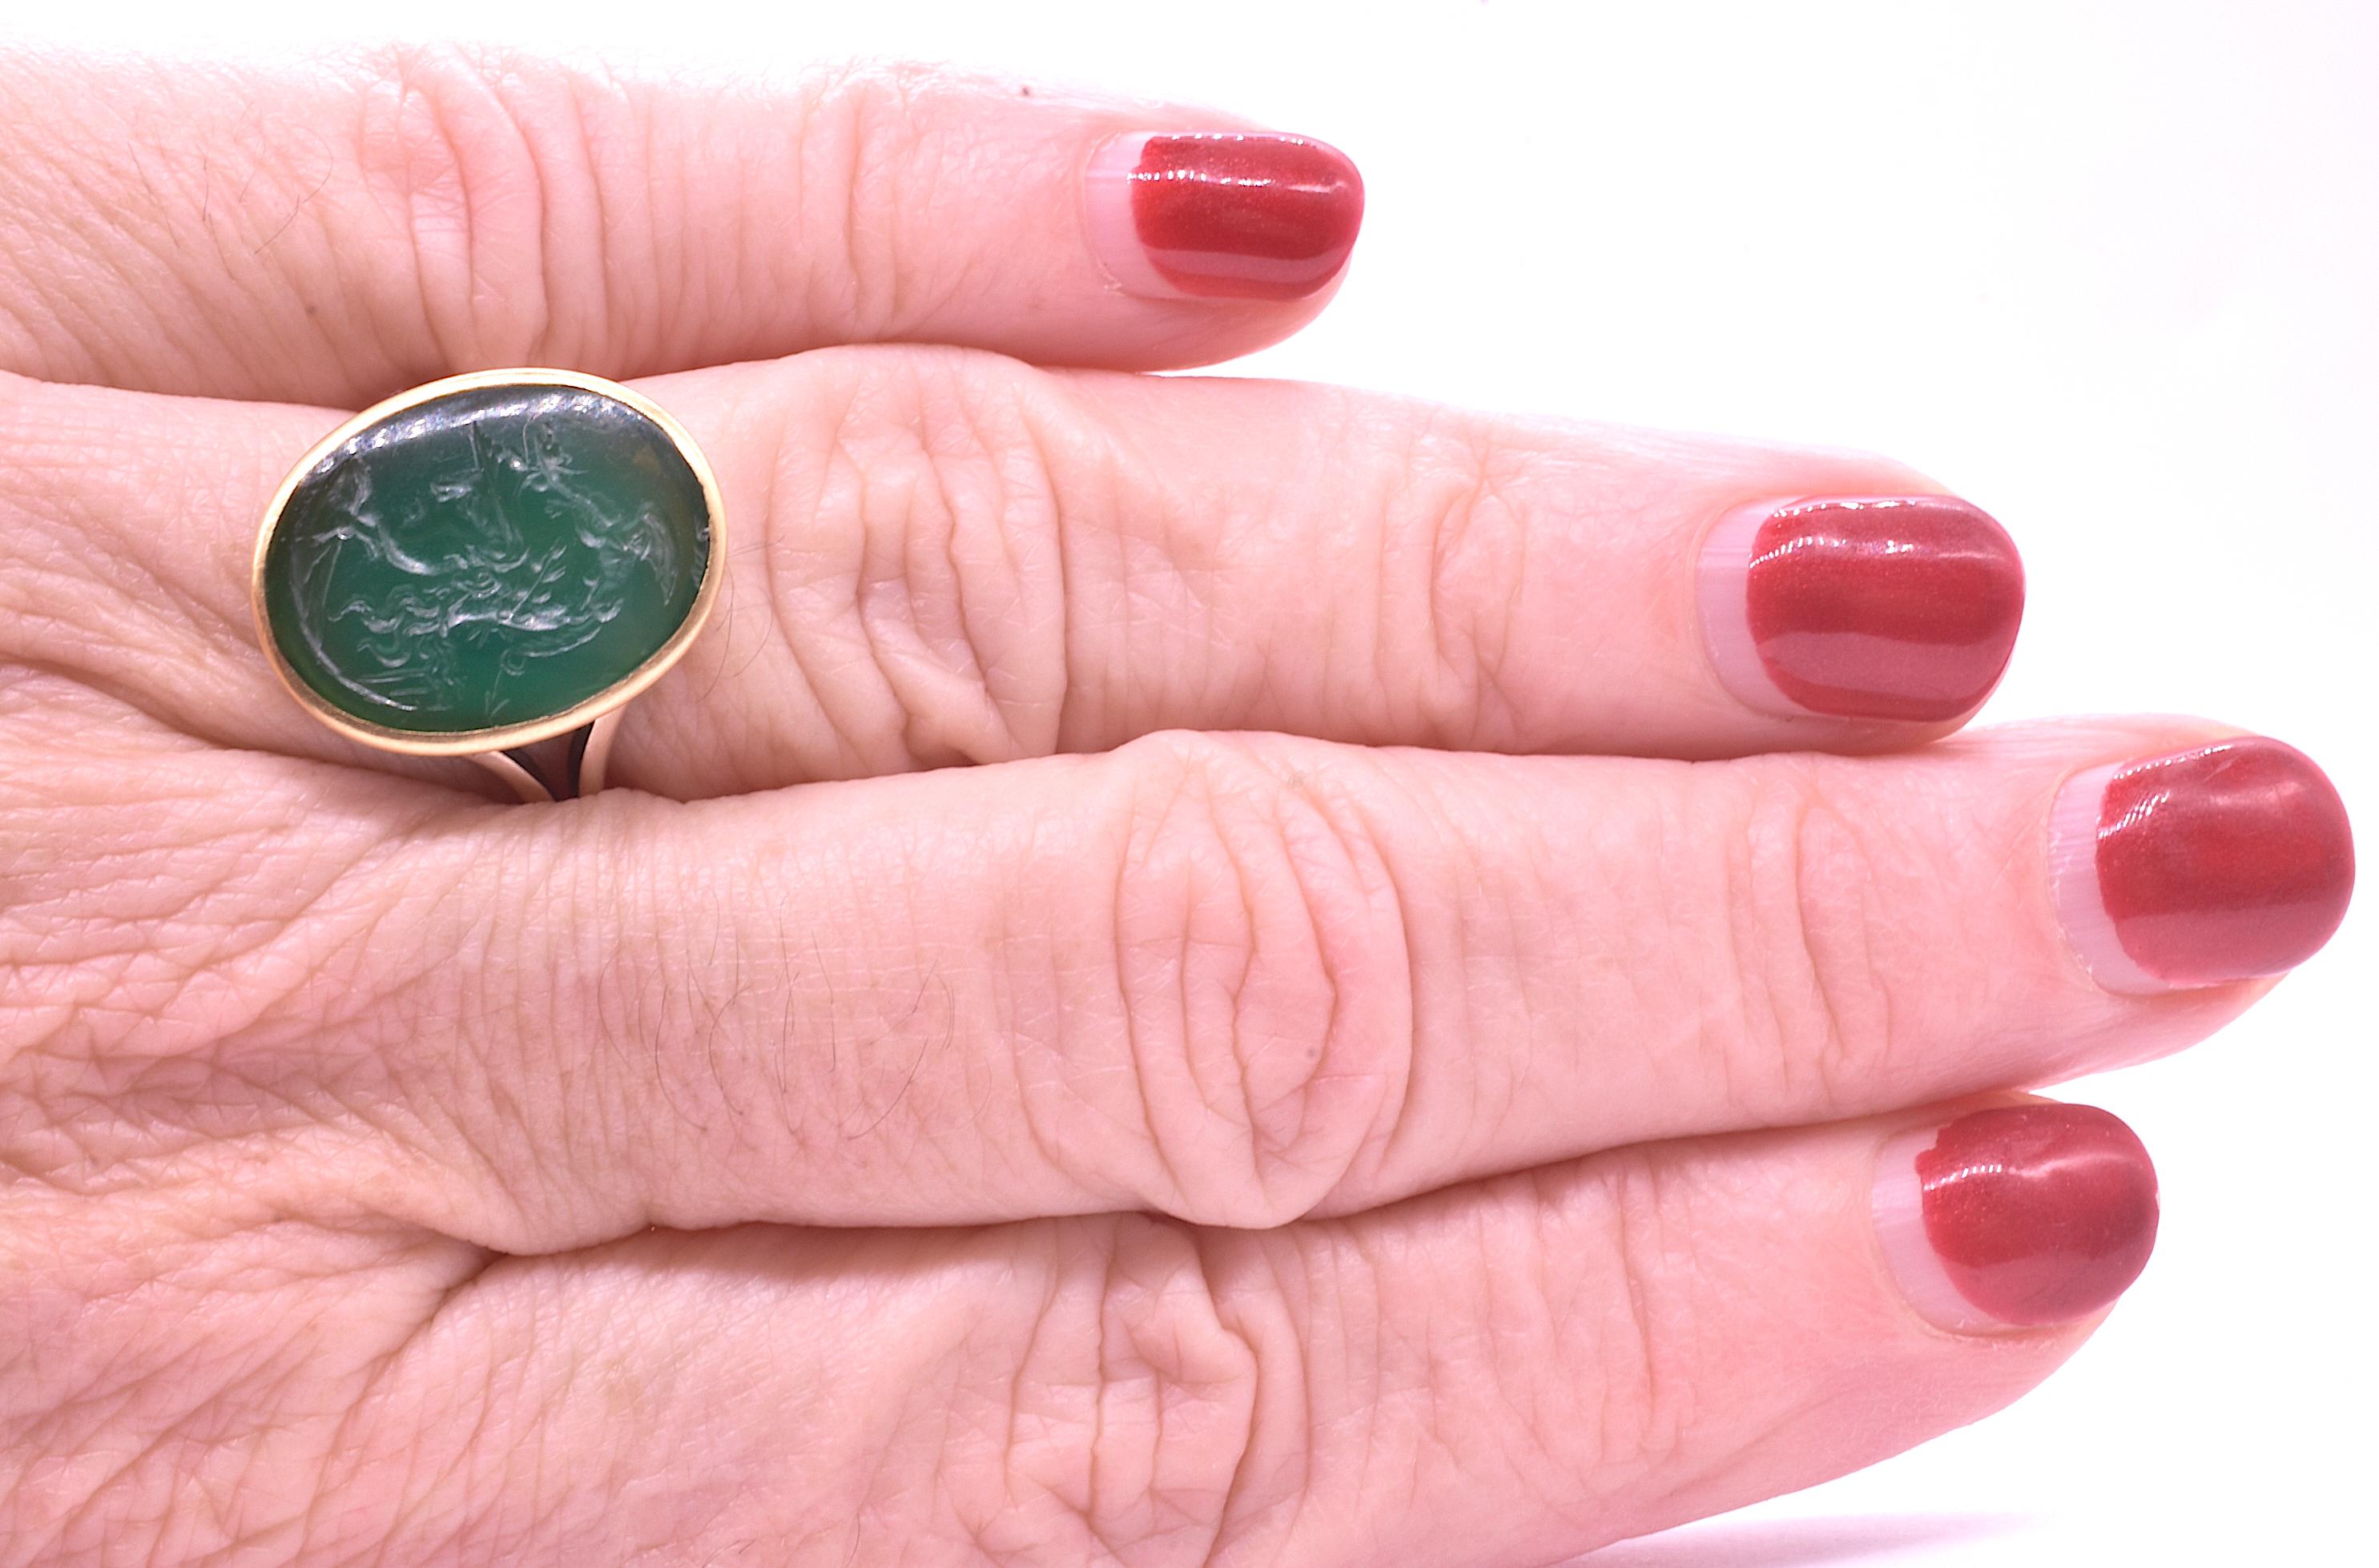 Cabochon C1860 Agate Signet Ring of Bust of Helmeted Warrior, Probably Menelaus